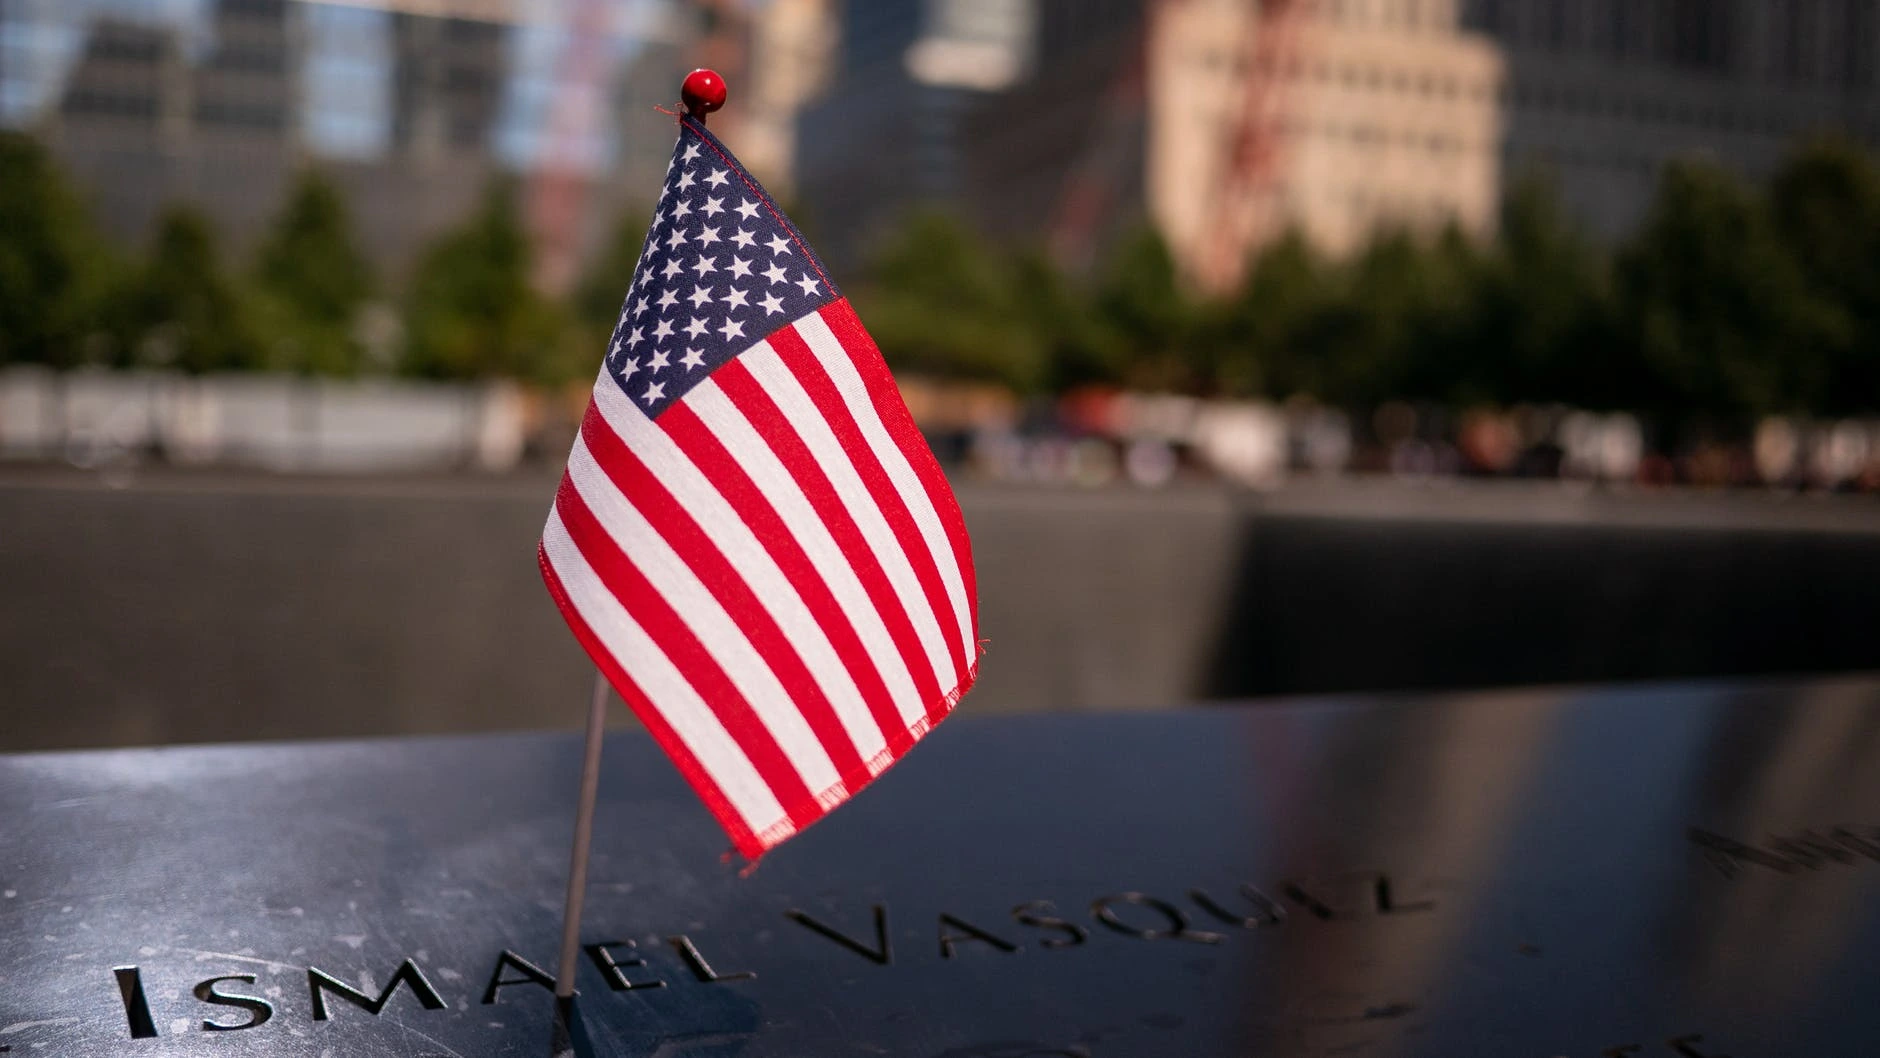 9/11’s Impact on America and the World